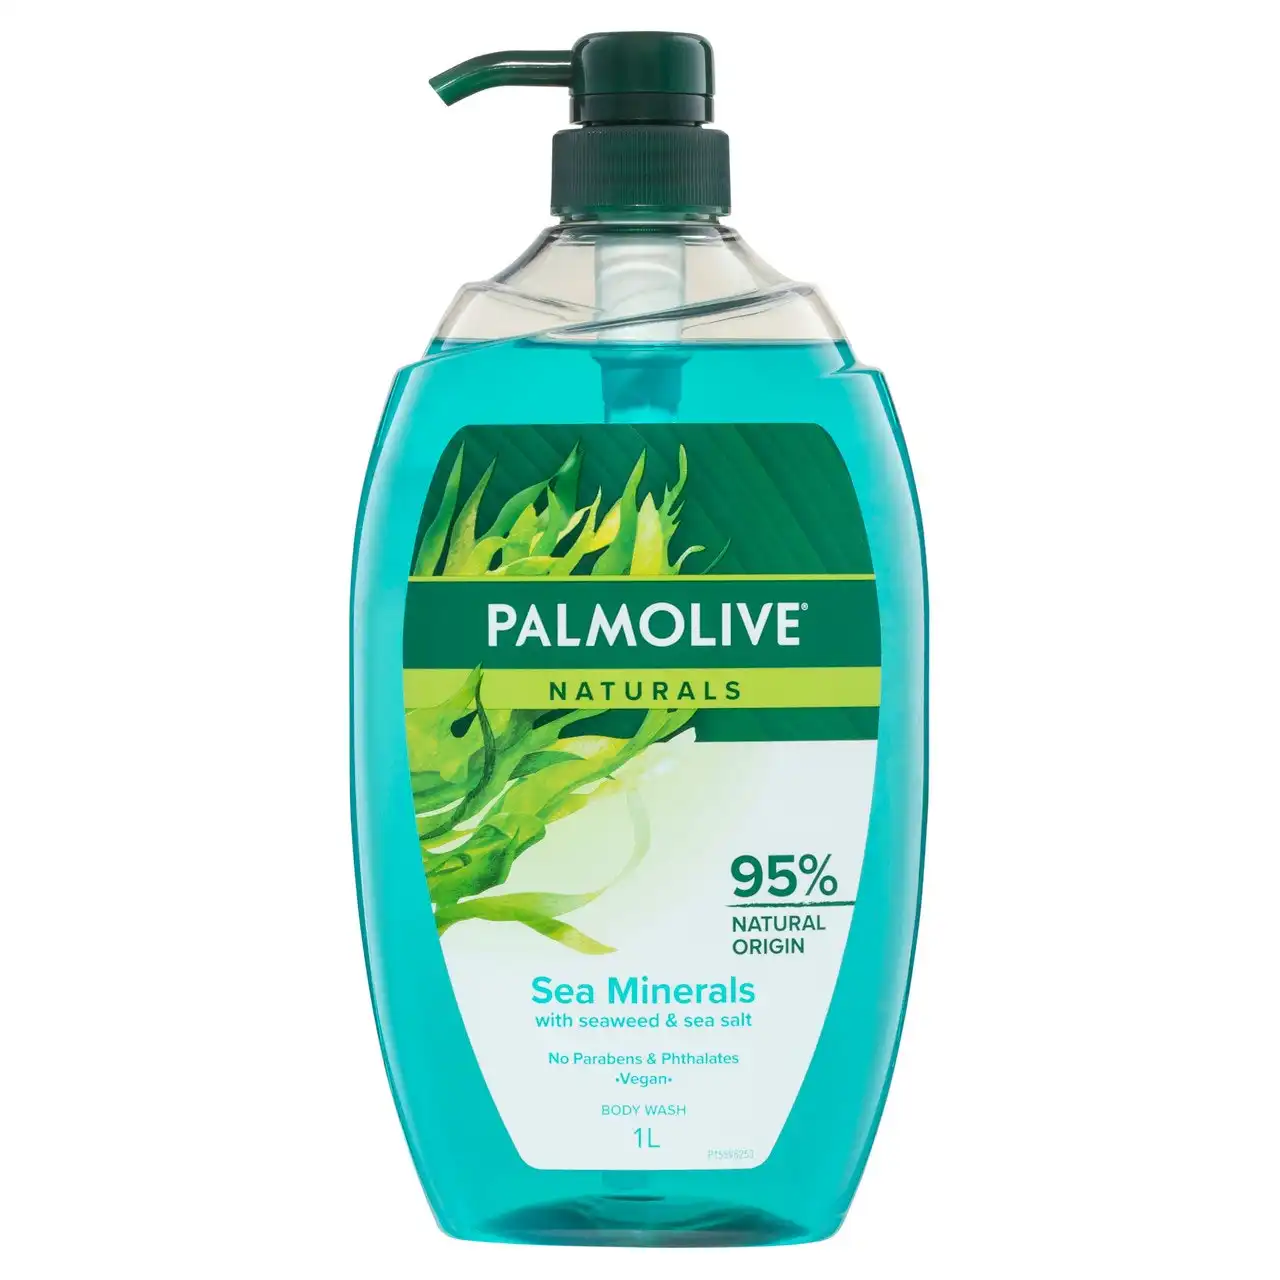 Palmolive Naturals Body Wash, 1L, Sea Minerals with Seaweed and Sea Salt, No Parabens